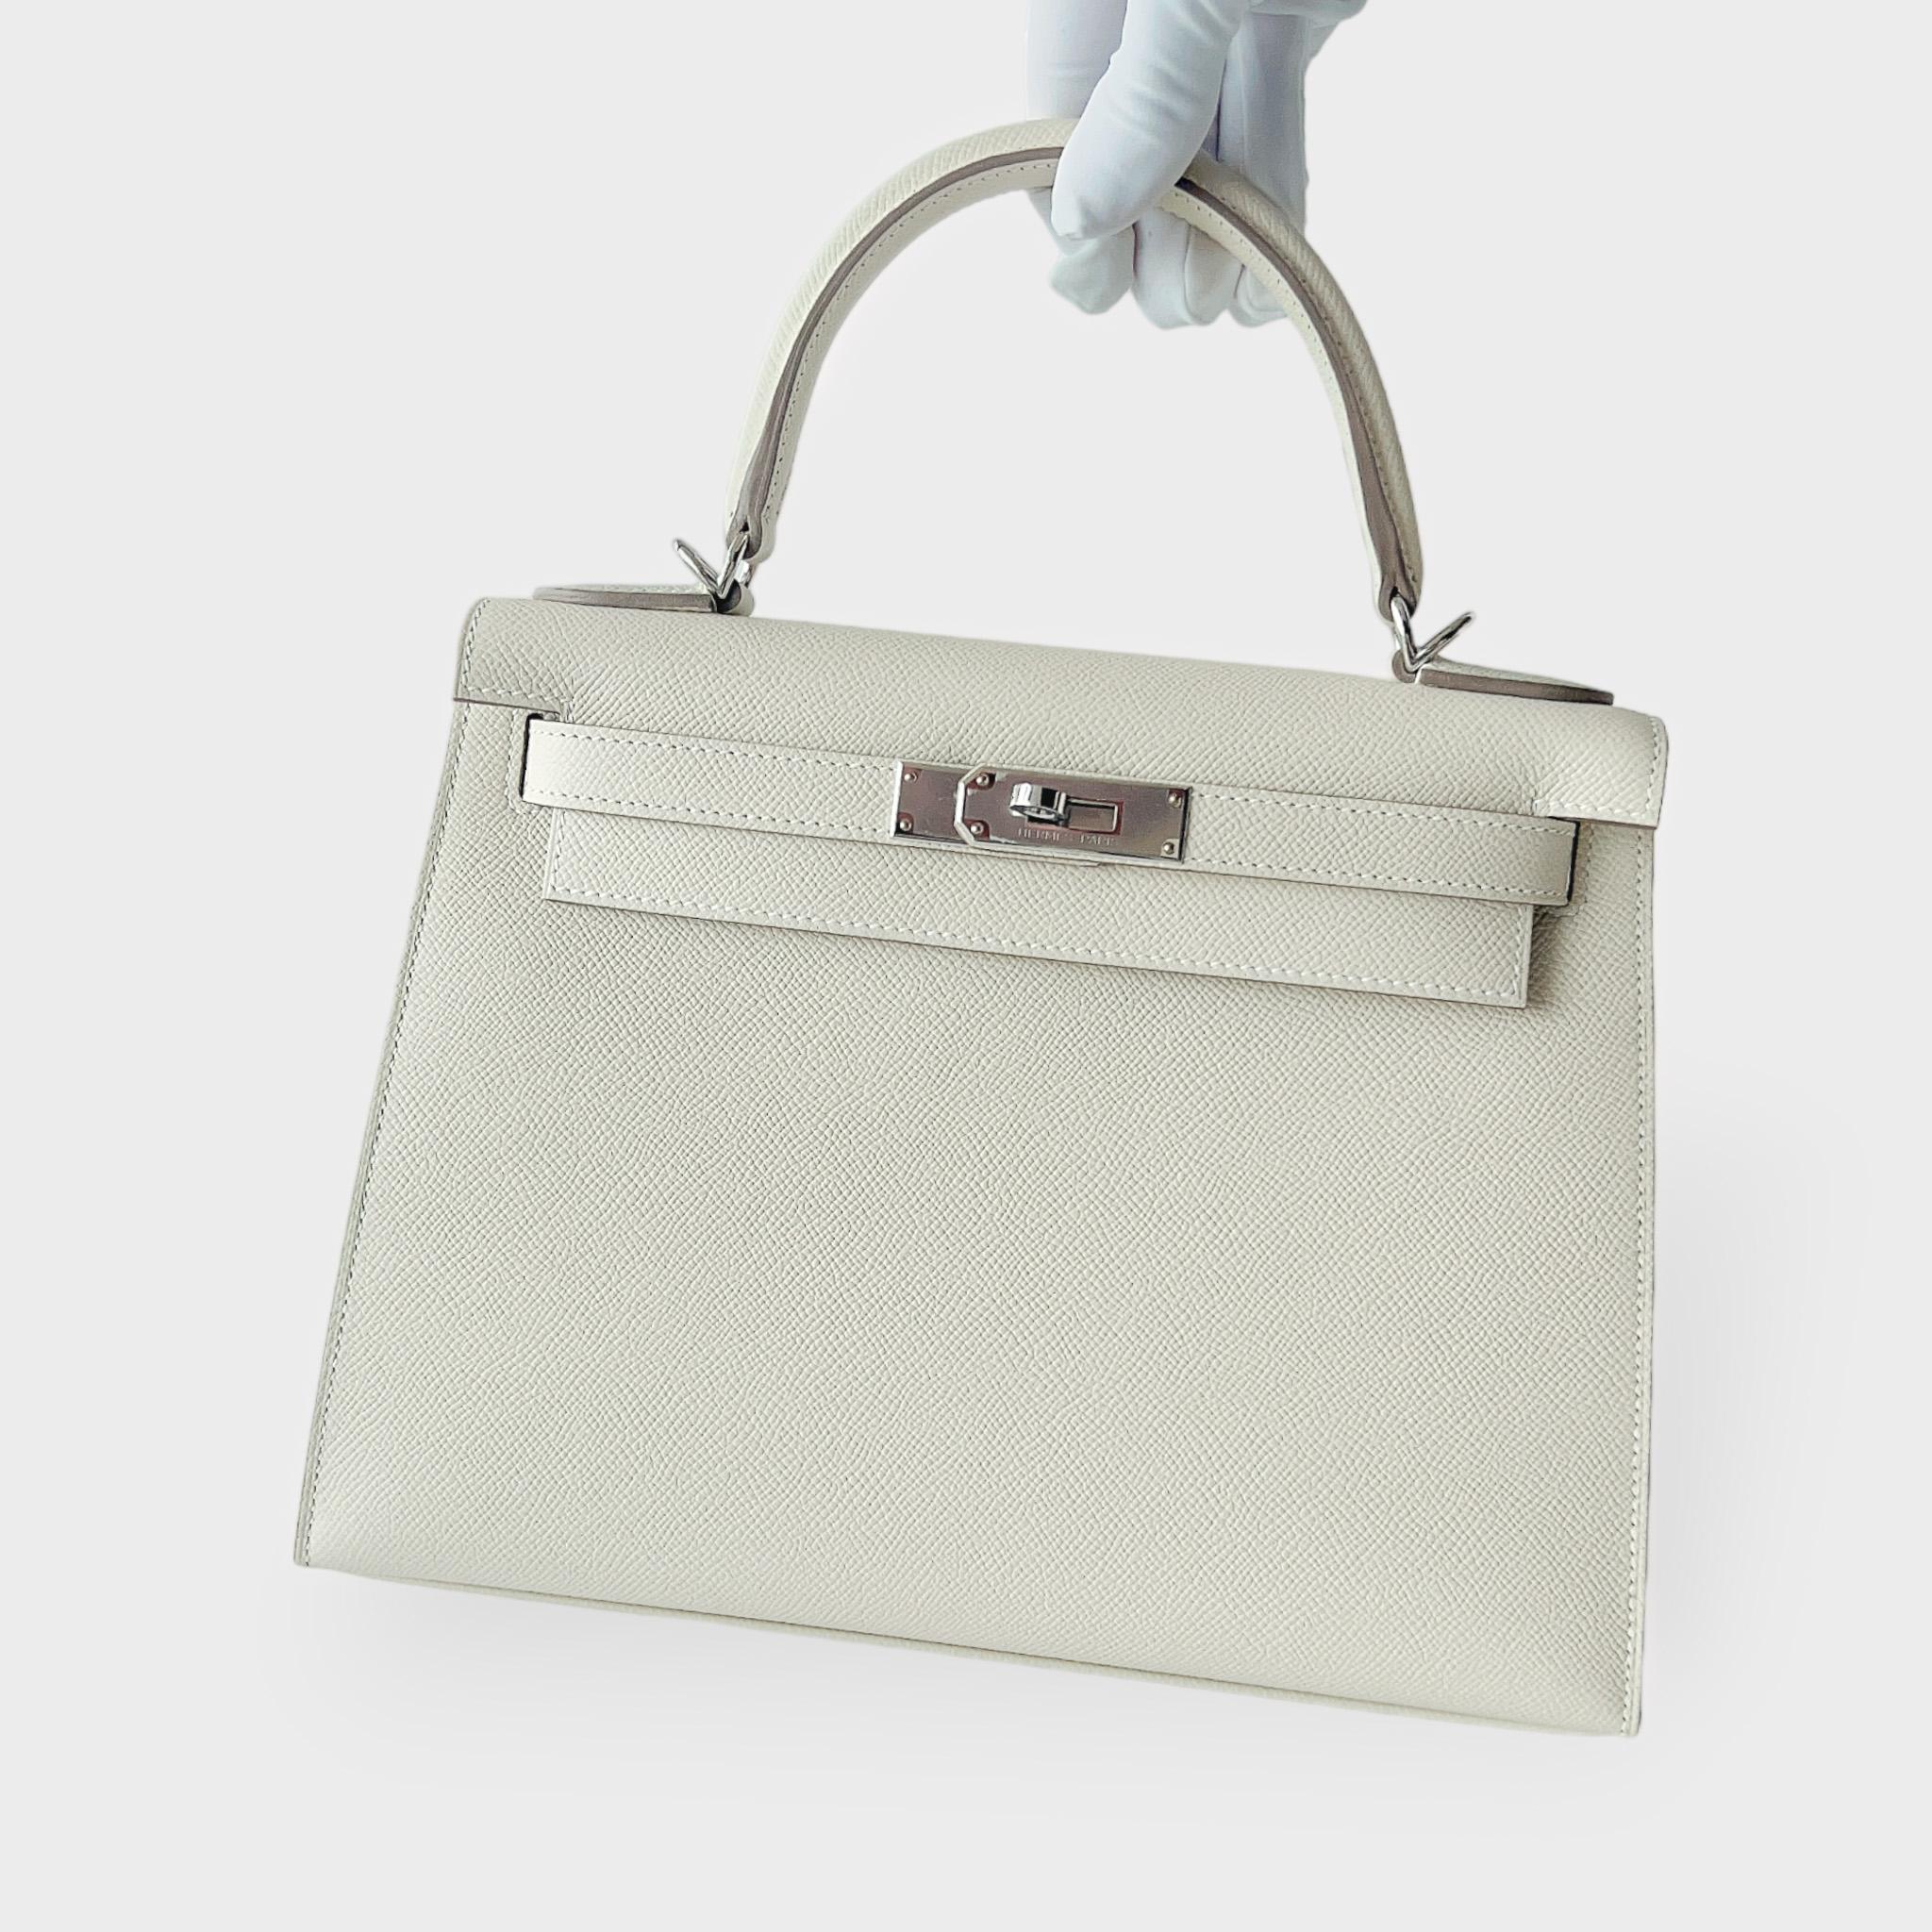 Shop this elegant Hermès Kelly 28 In Craie with Palladium Hardware. It is unused in pristine condition, purchased in 2023. This Hermès Kelly 28cm Bag comes in Craie, which is the perfect neutral slightly creamy white for any season. The bag comes